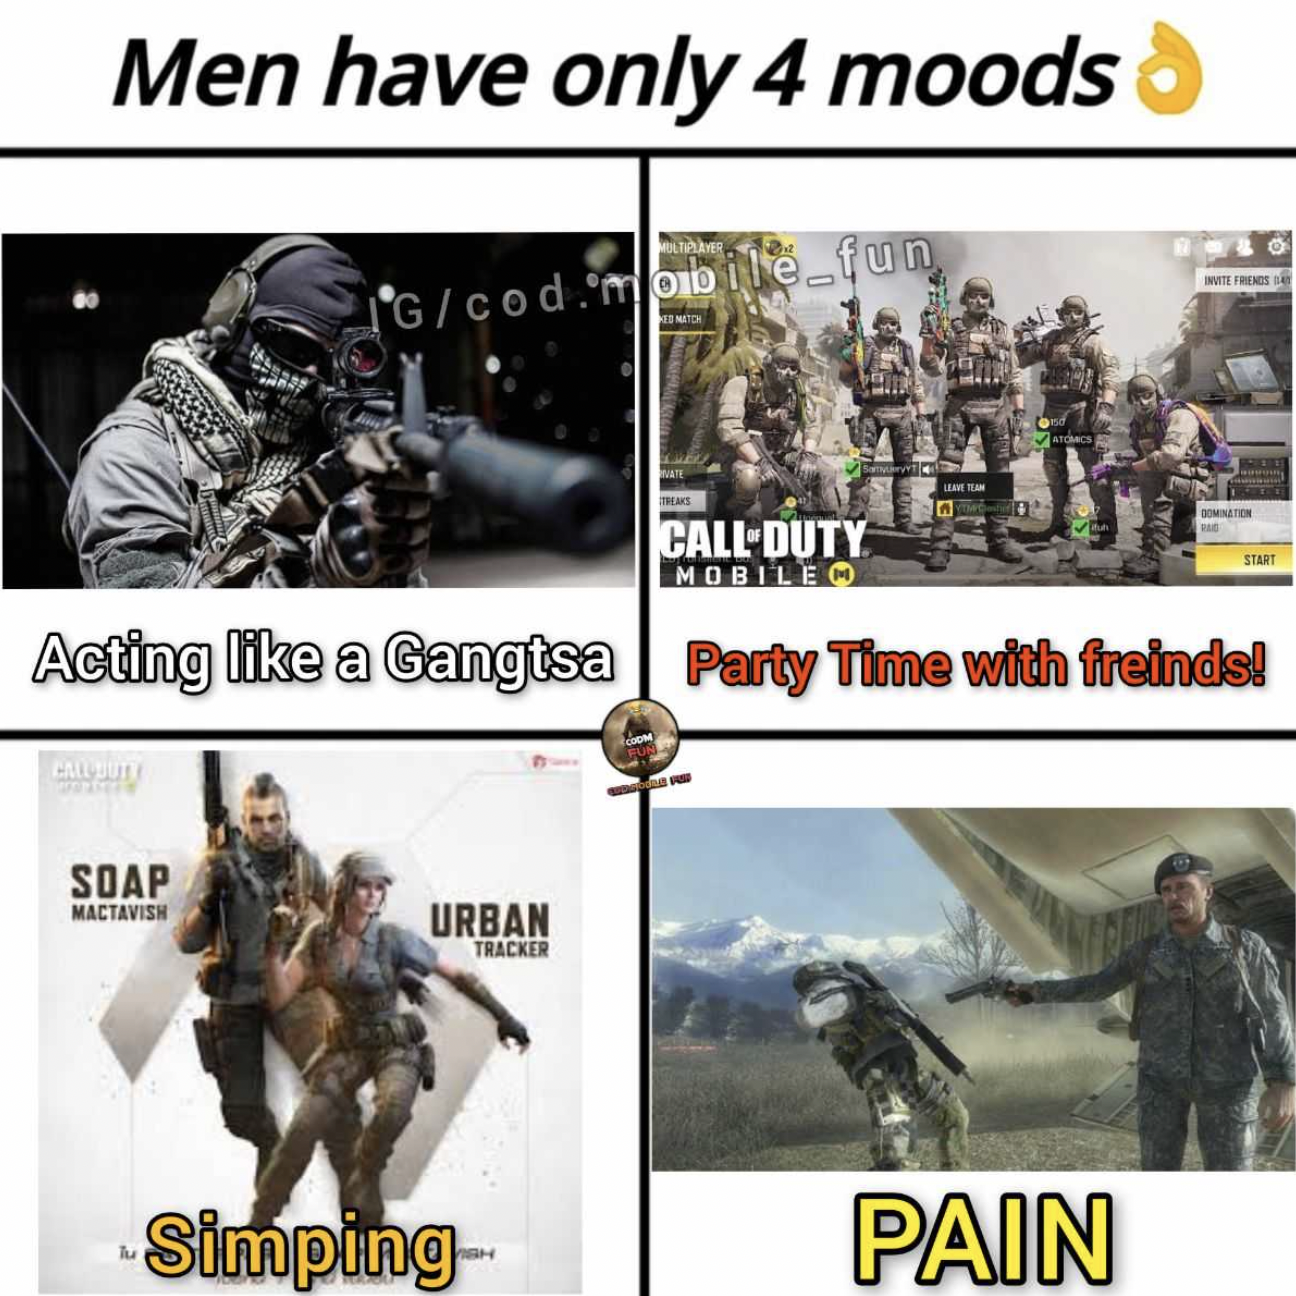 Call of Duty Memes - codm memes - Men have only 4 moods Gcod.mobile fun CallDuty Mobile Acting a Gangtsa Party Time with freinds! Soap Mactavish Urban Tracker Simping